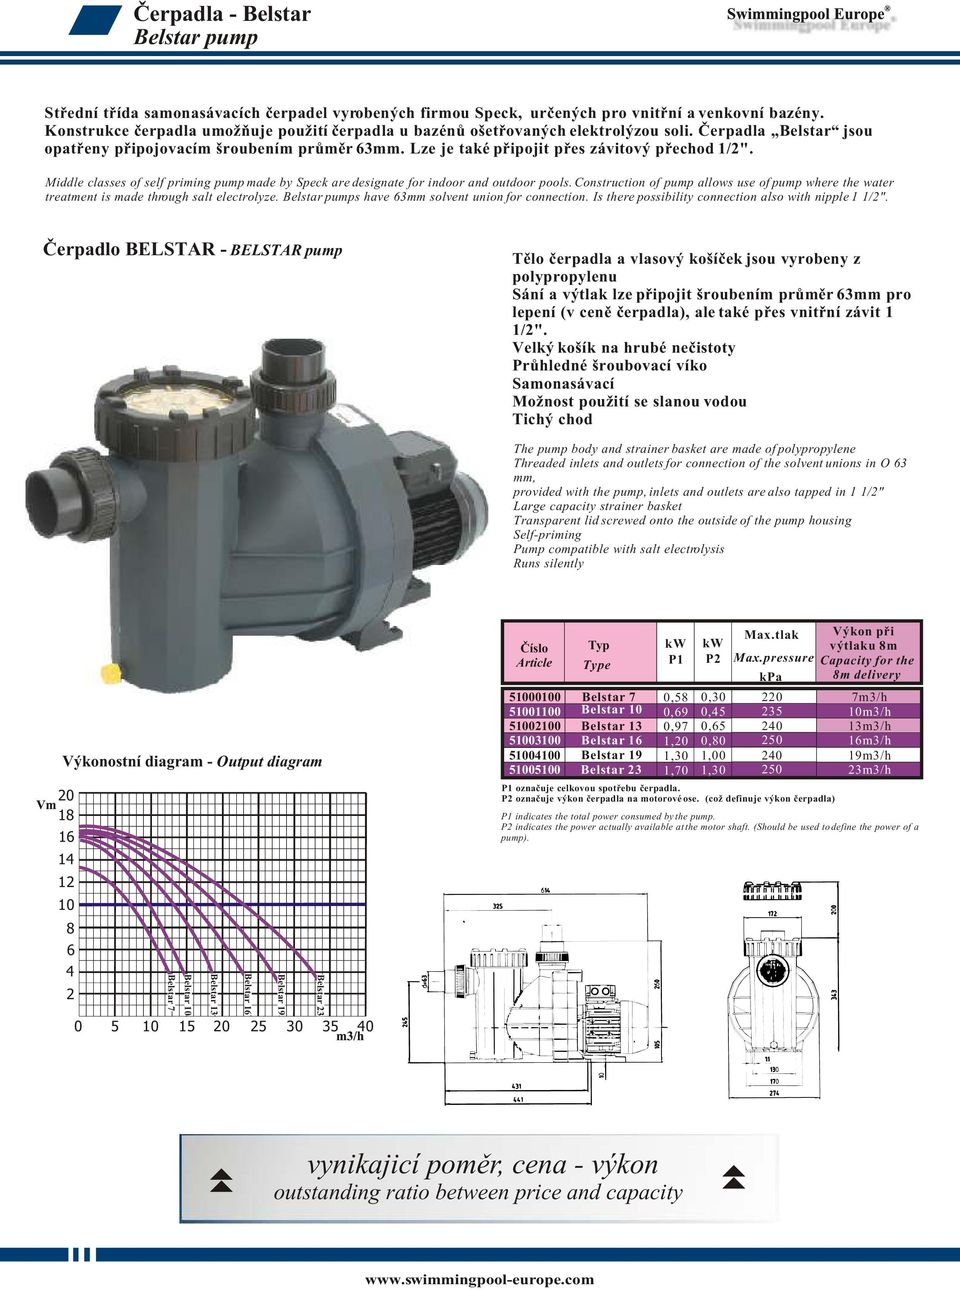 Middle classes of self priming pump made by Speck are designate for indoor and outdoor pools. Construction of pump allows use of pump where the water treatment is made through salt electrolyze.